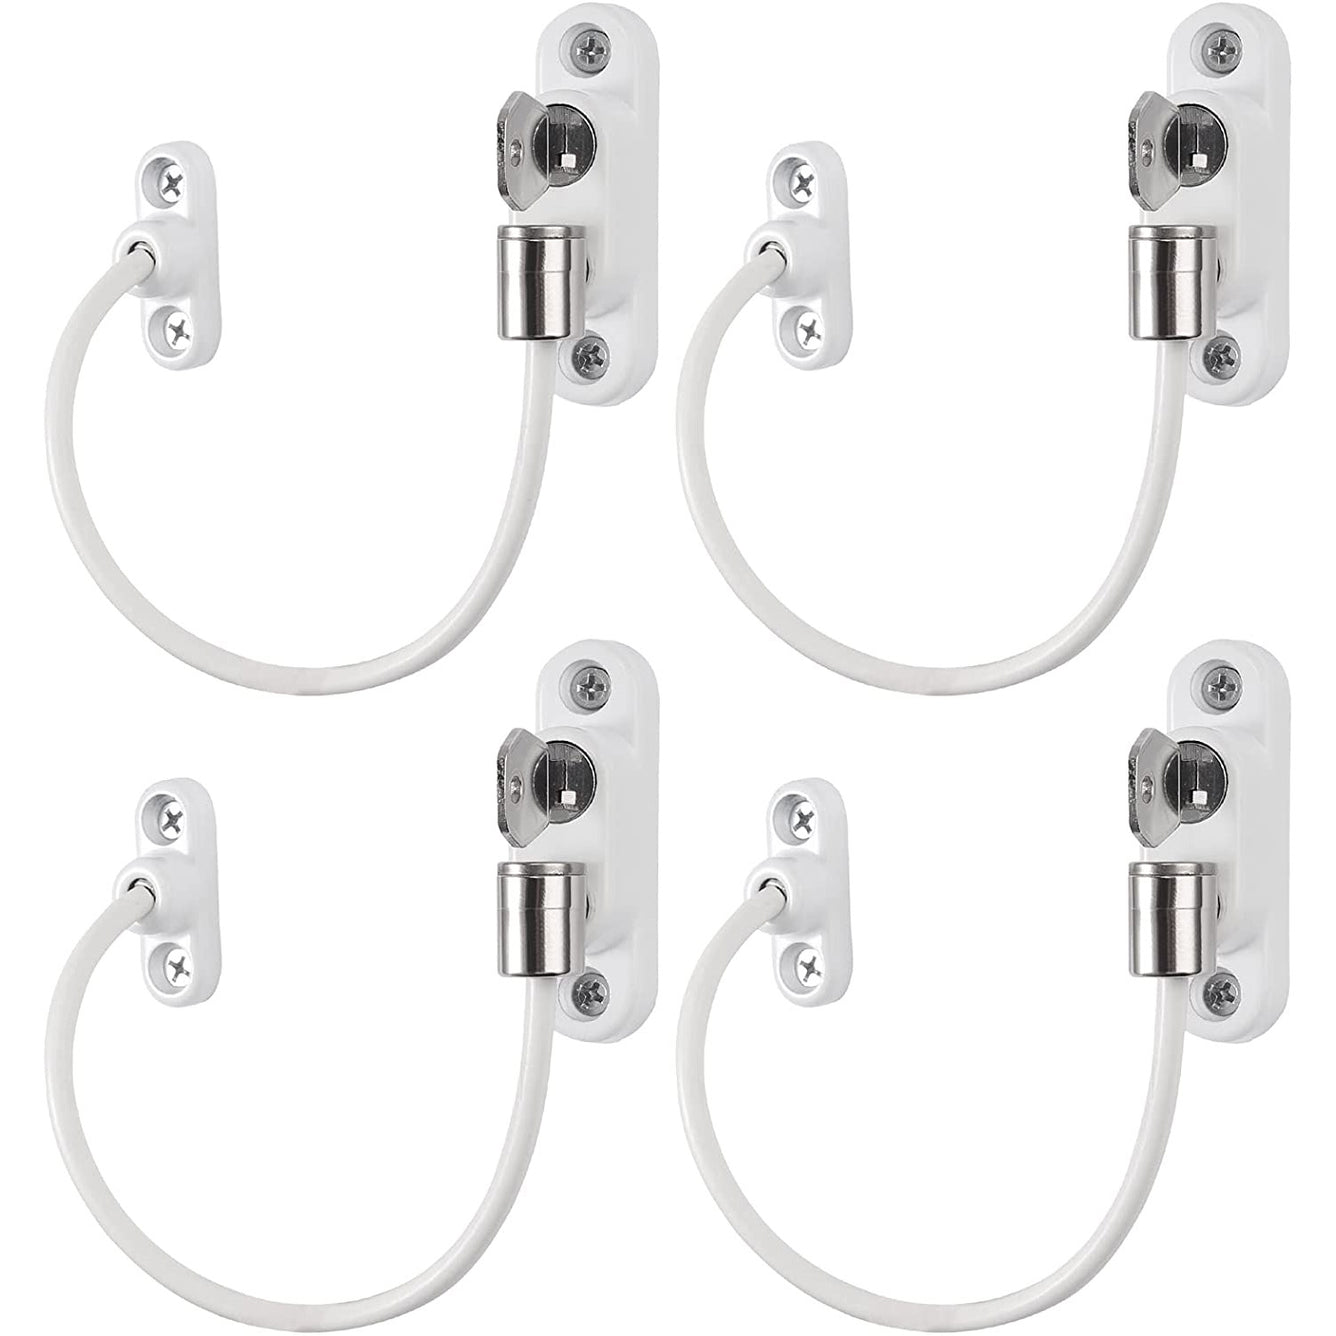 Neoteck 4PCS Window Restrictor Lock Double Protection